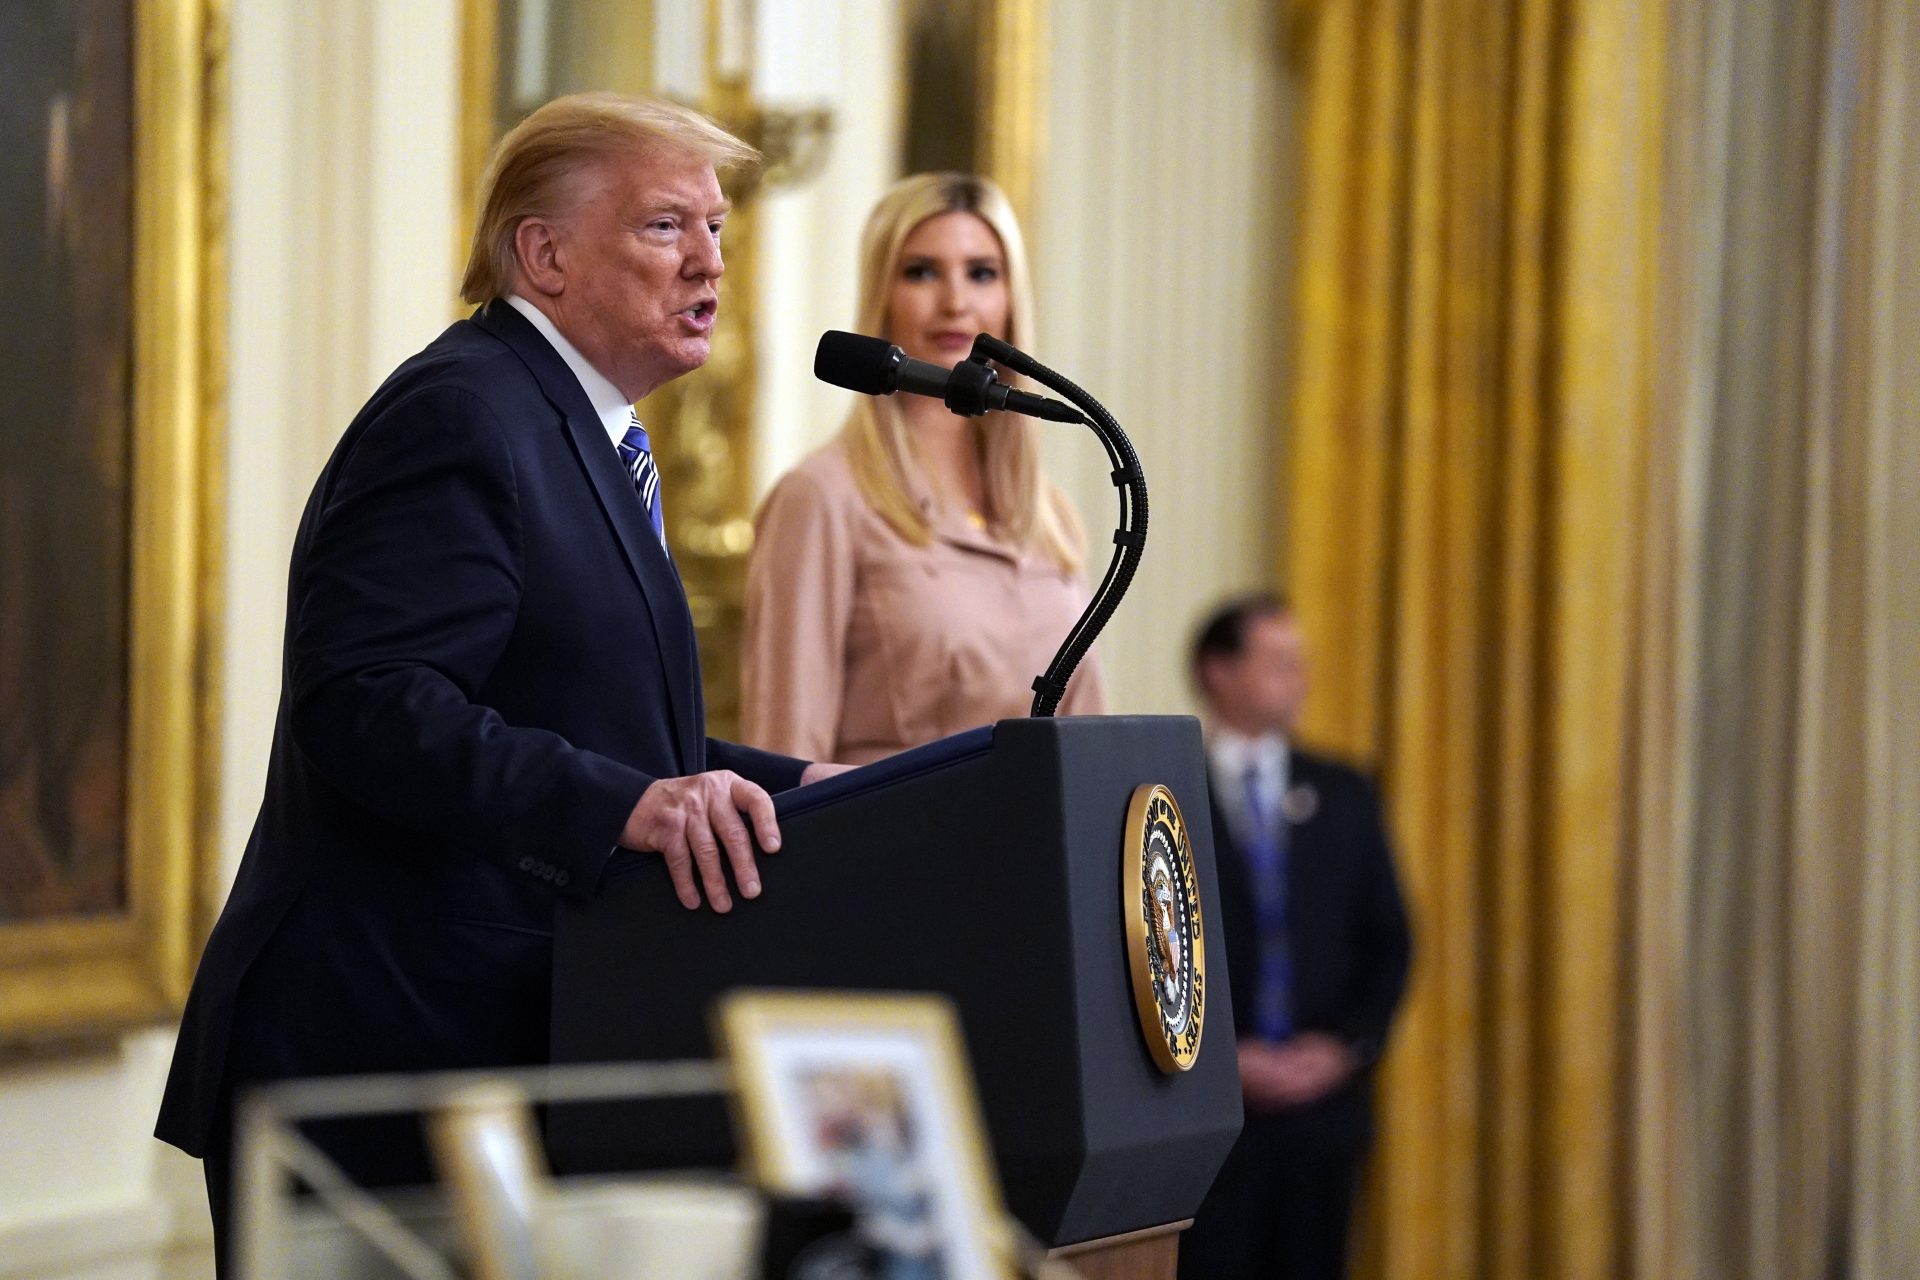 President Donald Trump speaks during an event about the Paycheck Protection Program used to support small businesses during the coronavirus outbreak, in the East Room of the White House, April 28, 2020, in Washington, as Ivanka Trump listens.